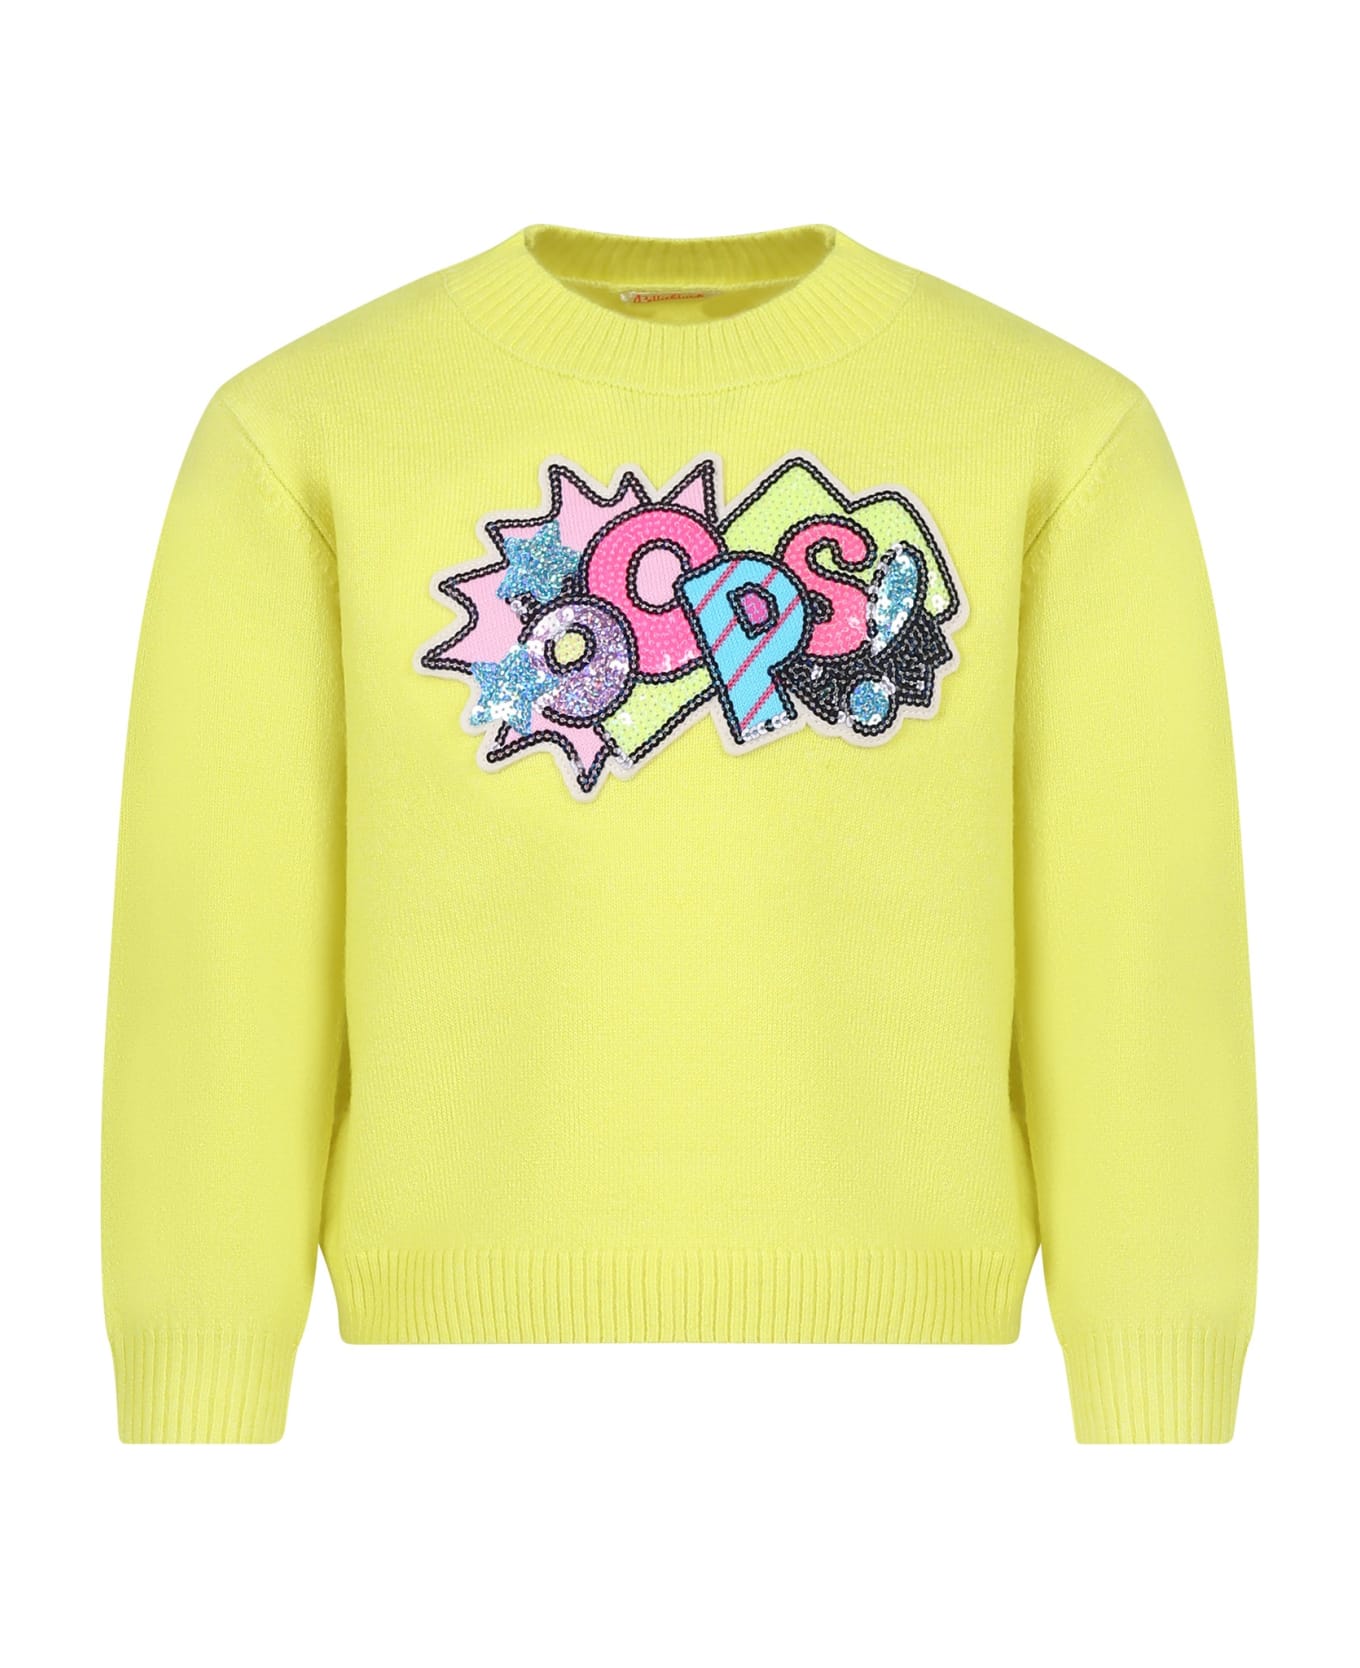 Billieblush Yellow Sweater For Girl With Multicolor Writing - Yellow